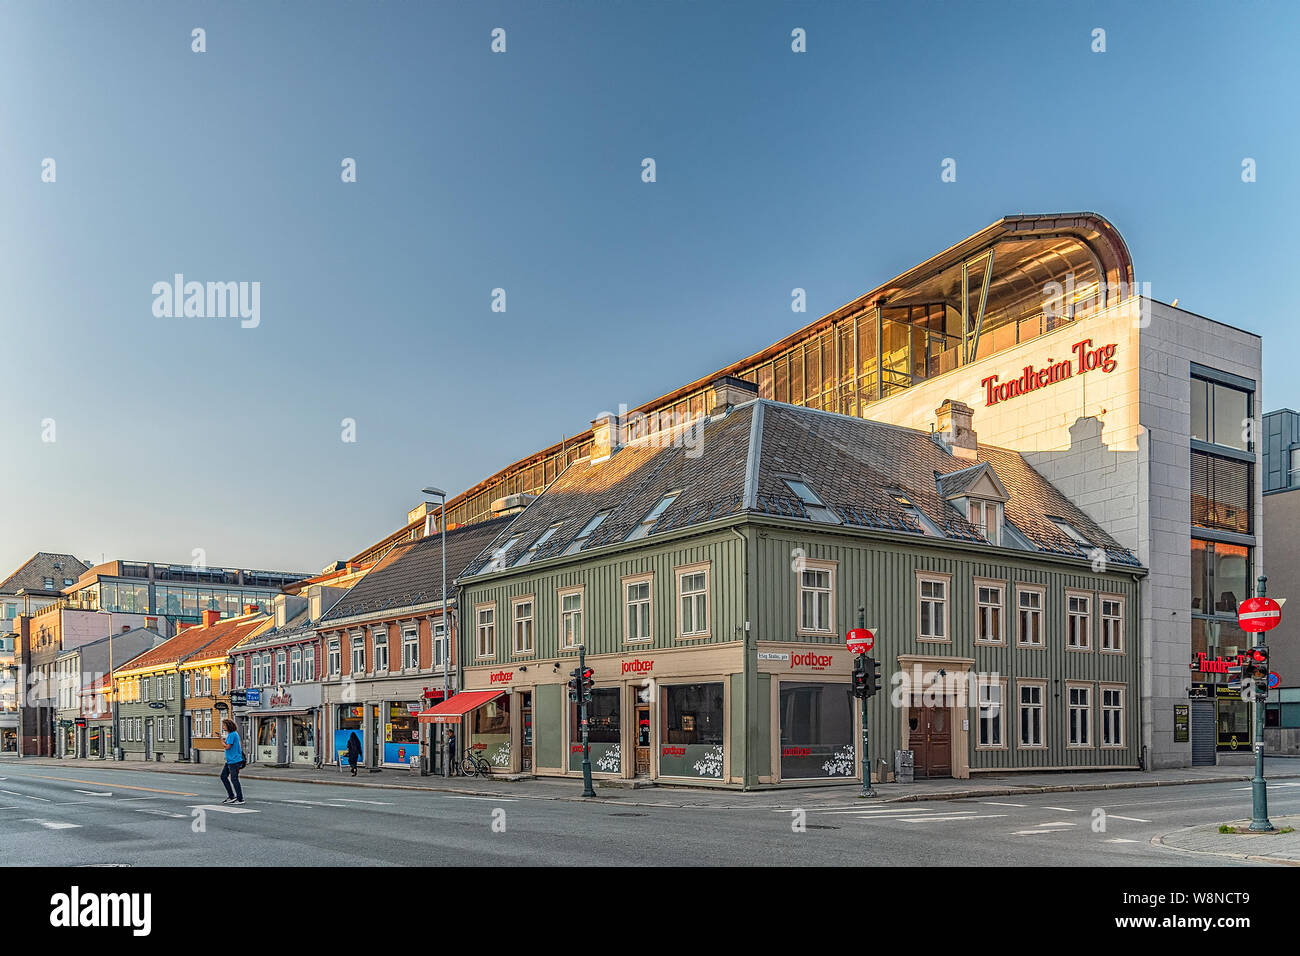 The Trondheim Torg shopping mall in Trondheim, Norway. Stock Photo